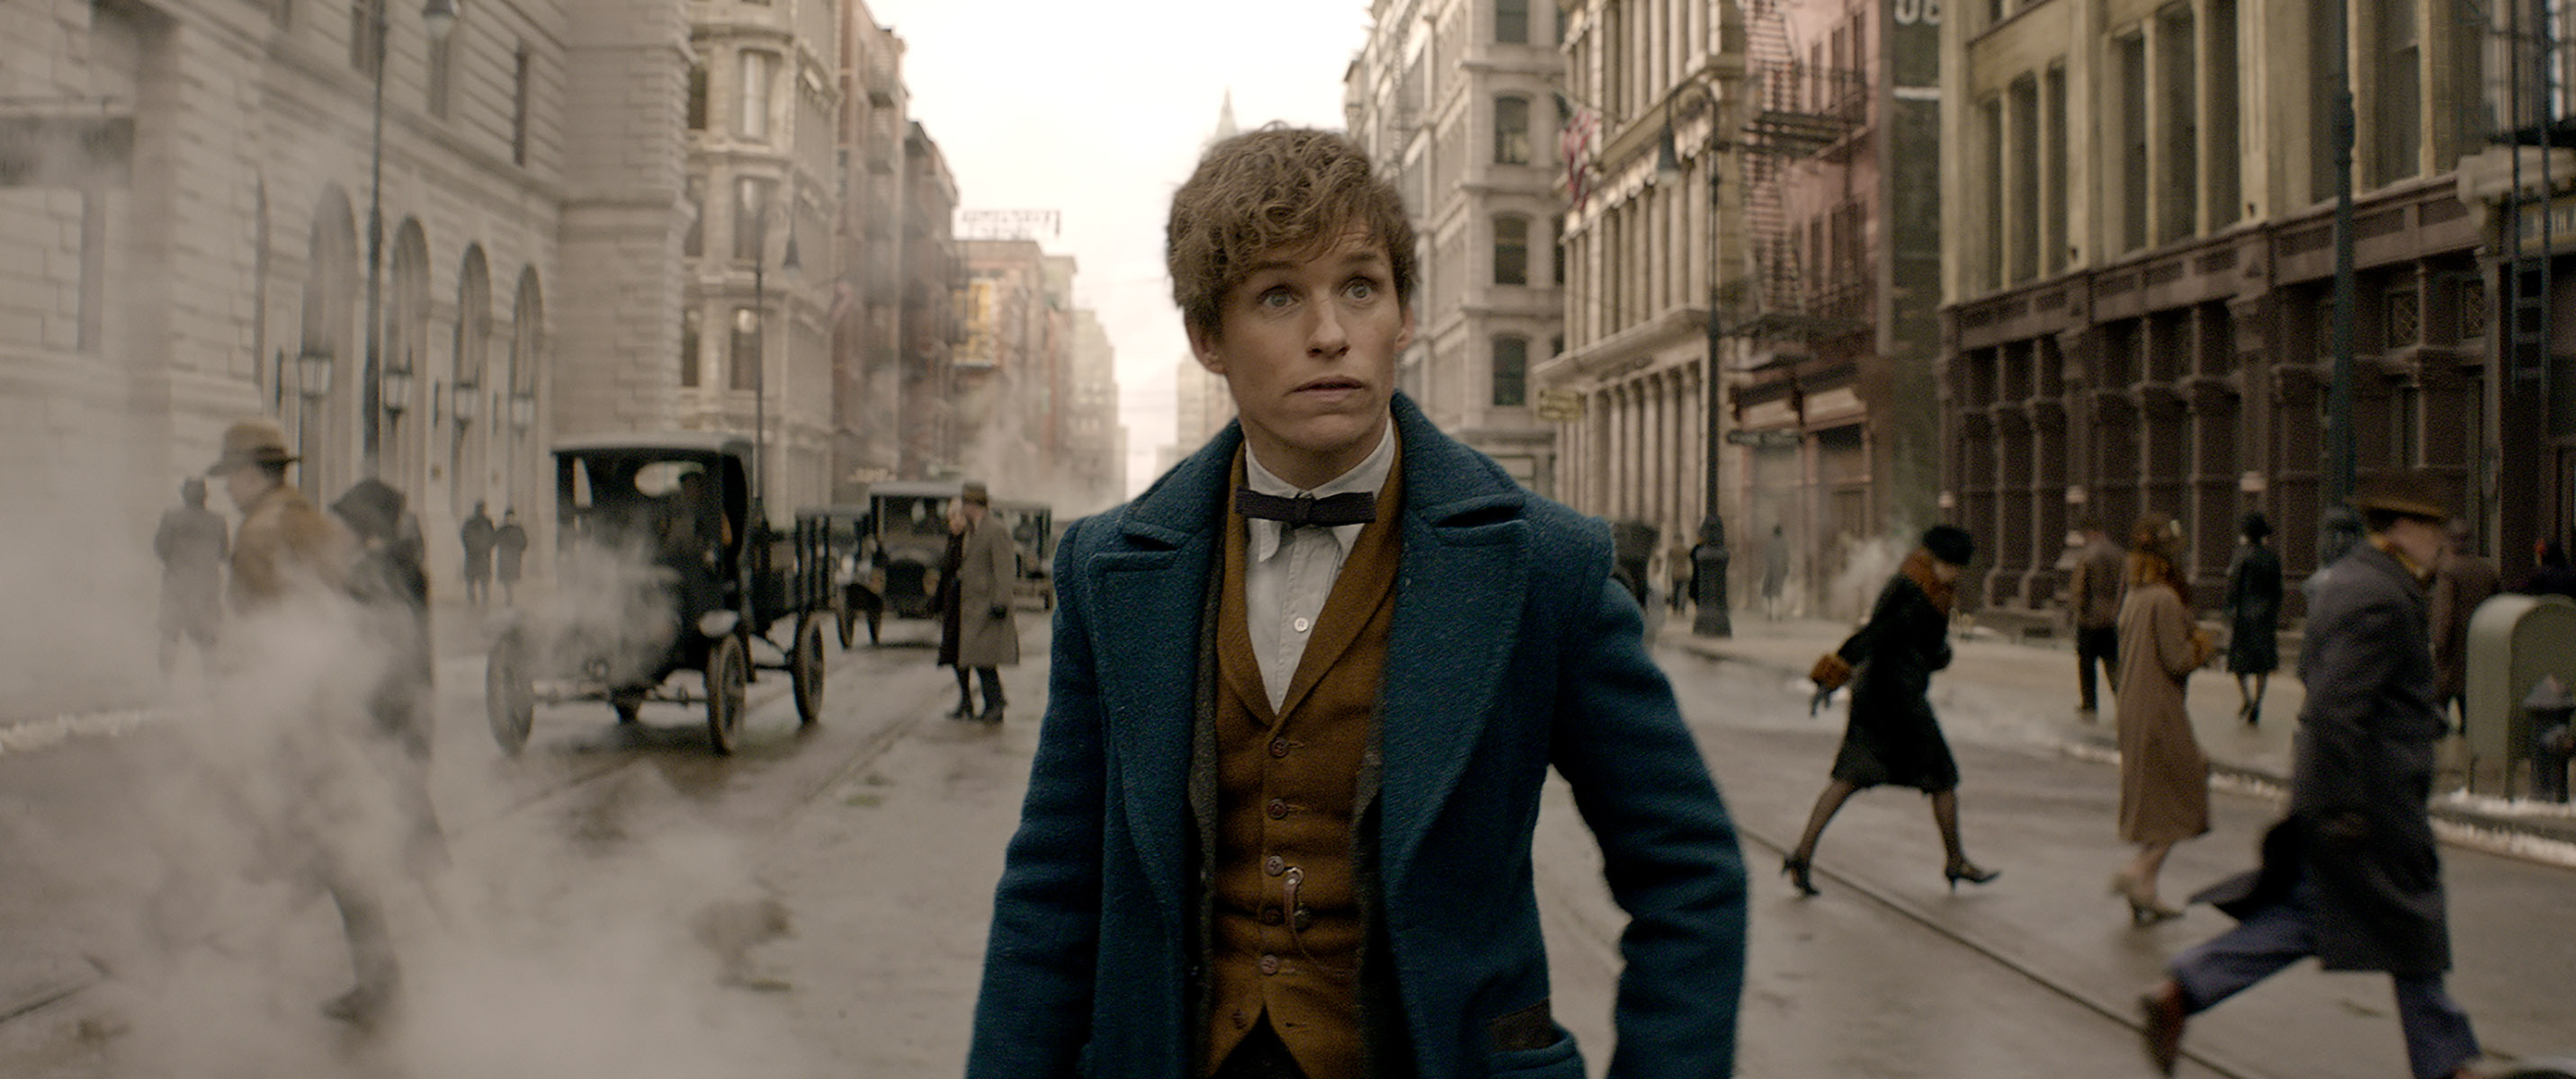 Film Watch 2016 Fantastic Beasts And Where To Find Them Online